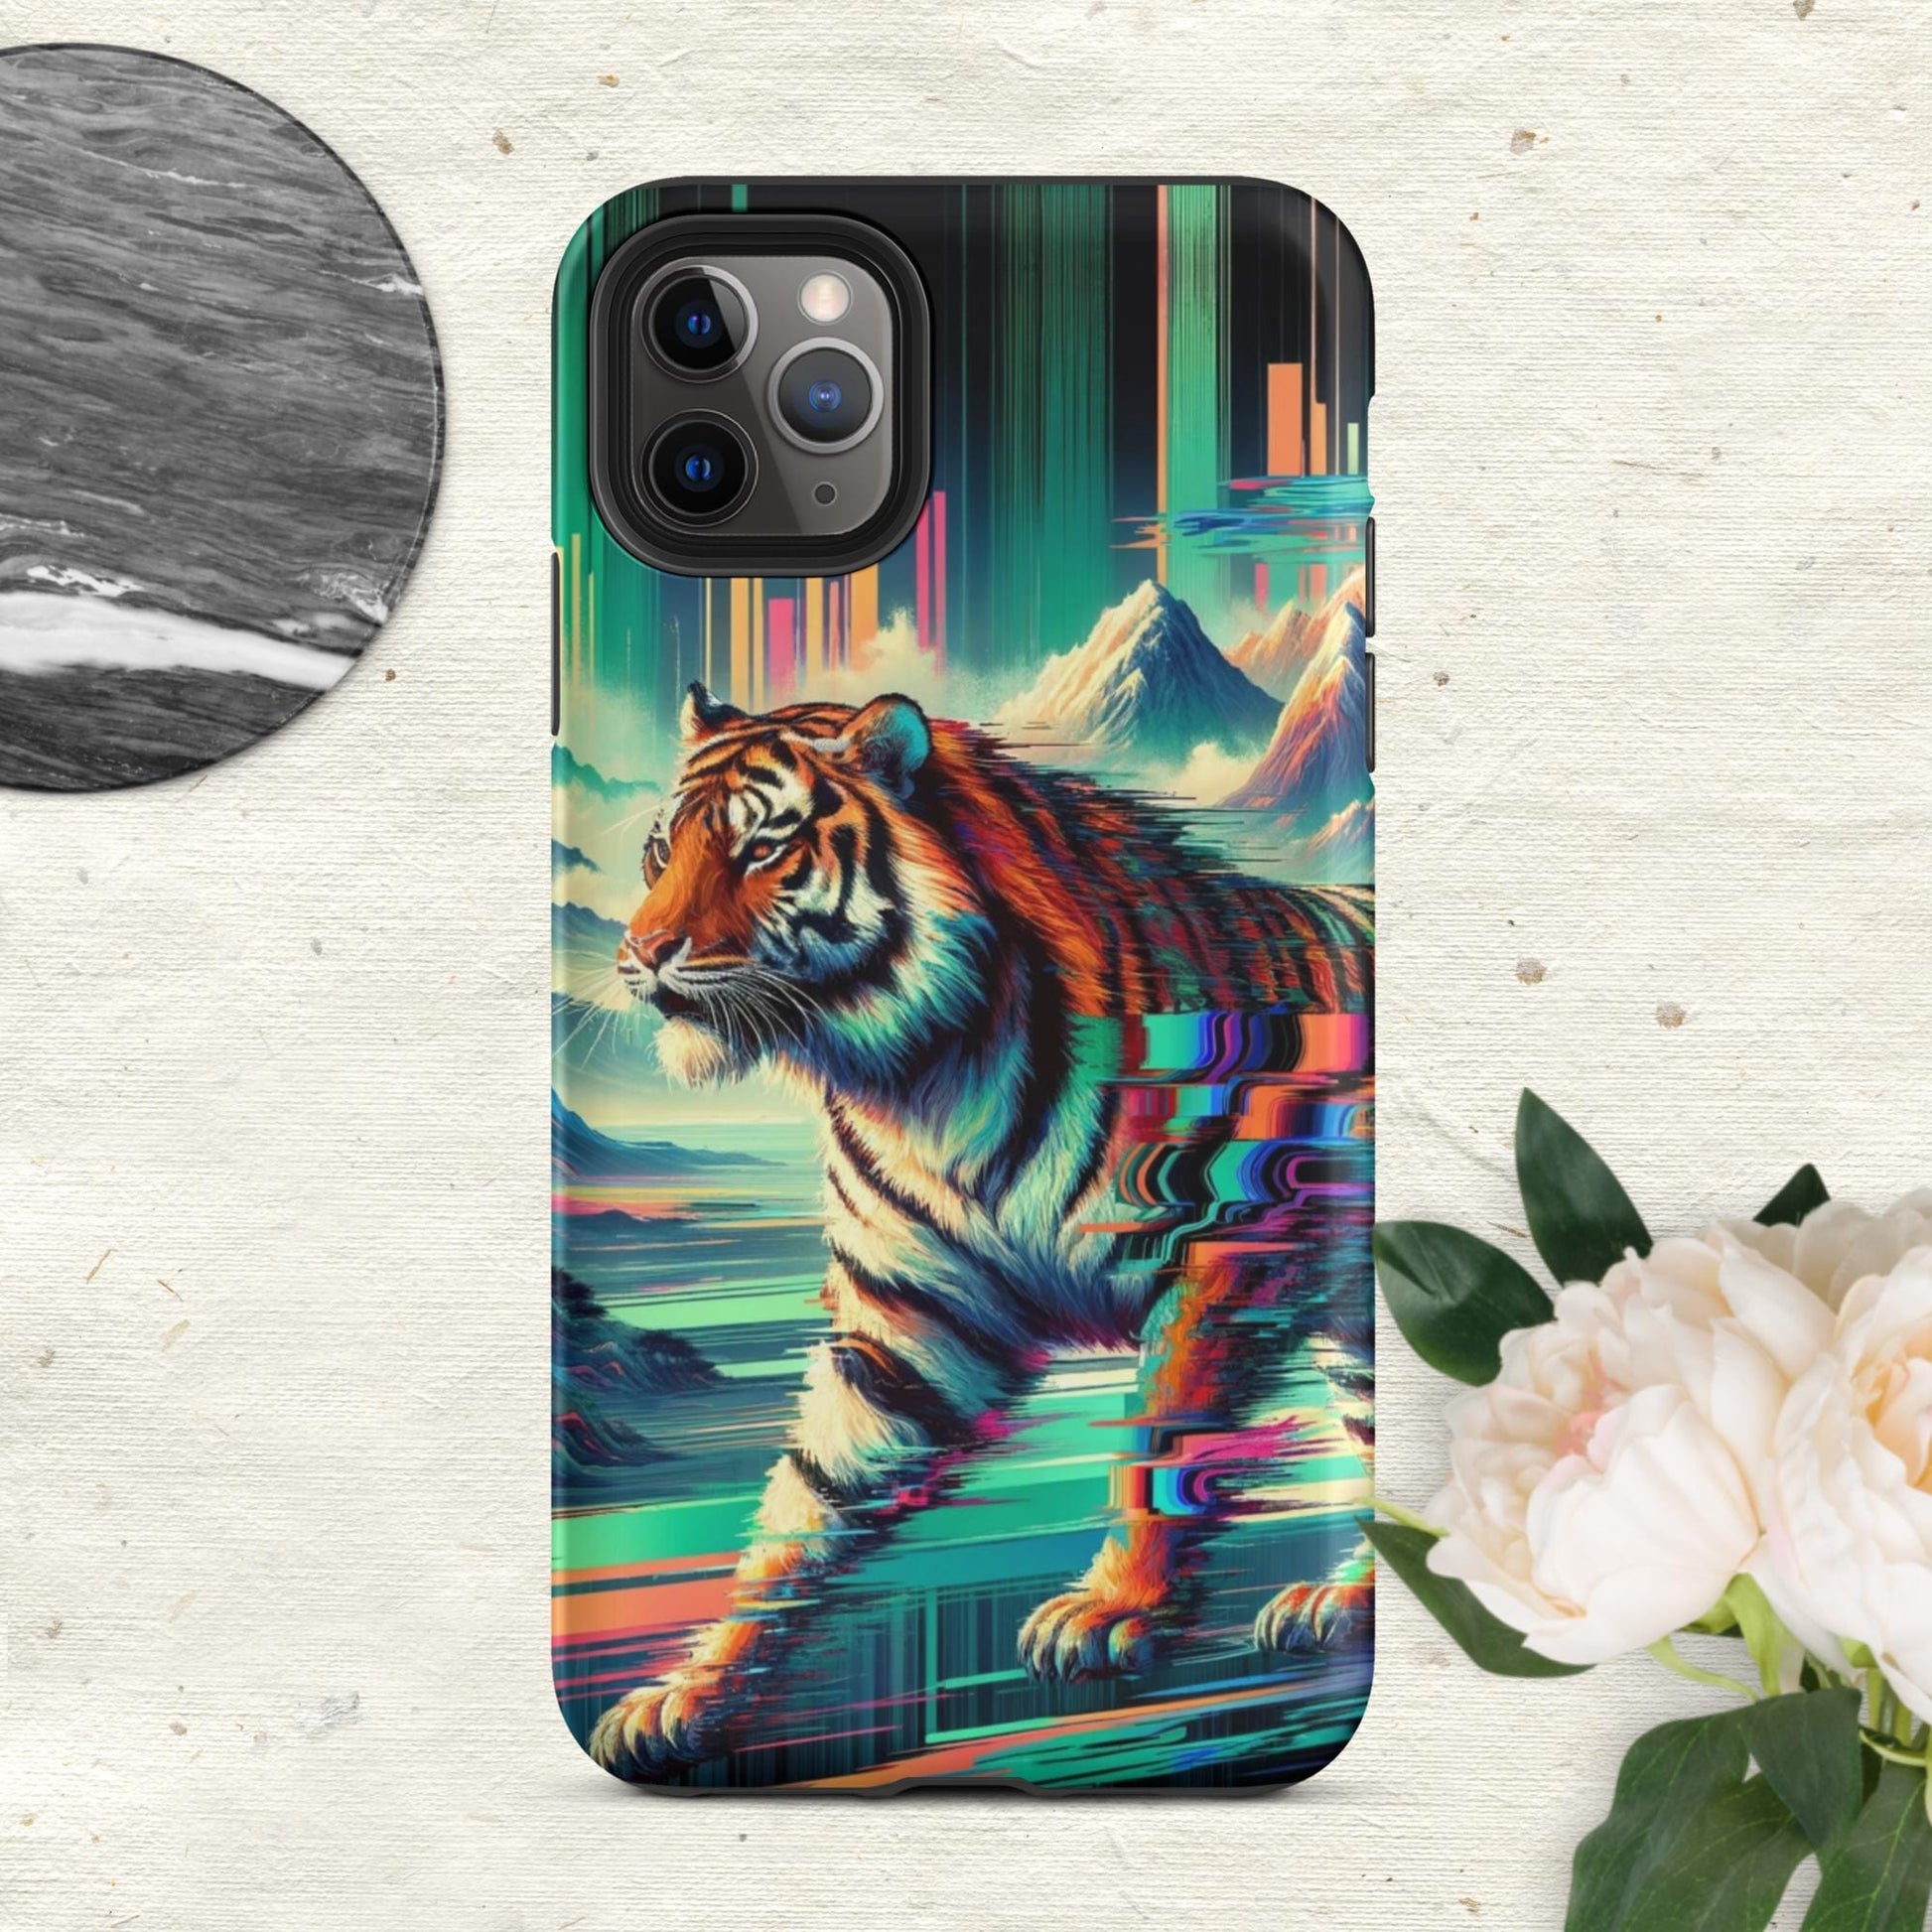 The Hologram Hook Up Matte / iPhone 11 Pro Max Tiger Glitch Tough Case for iPhone®